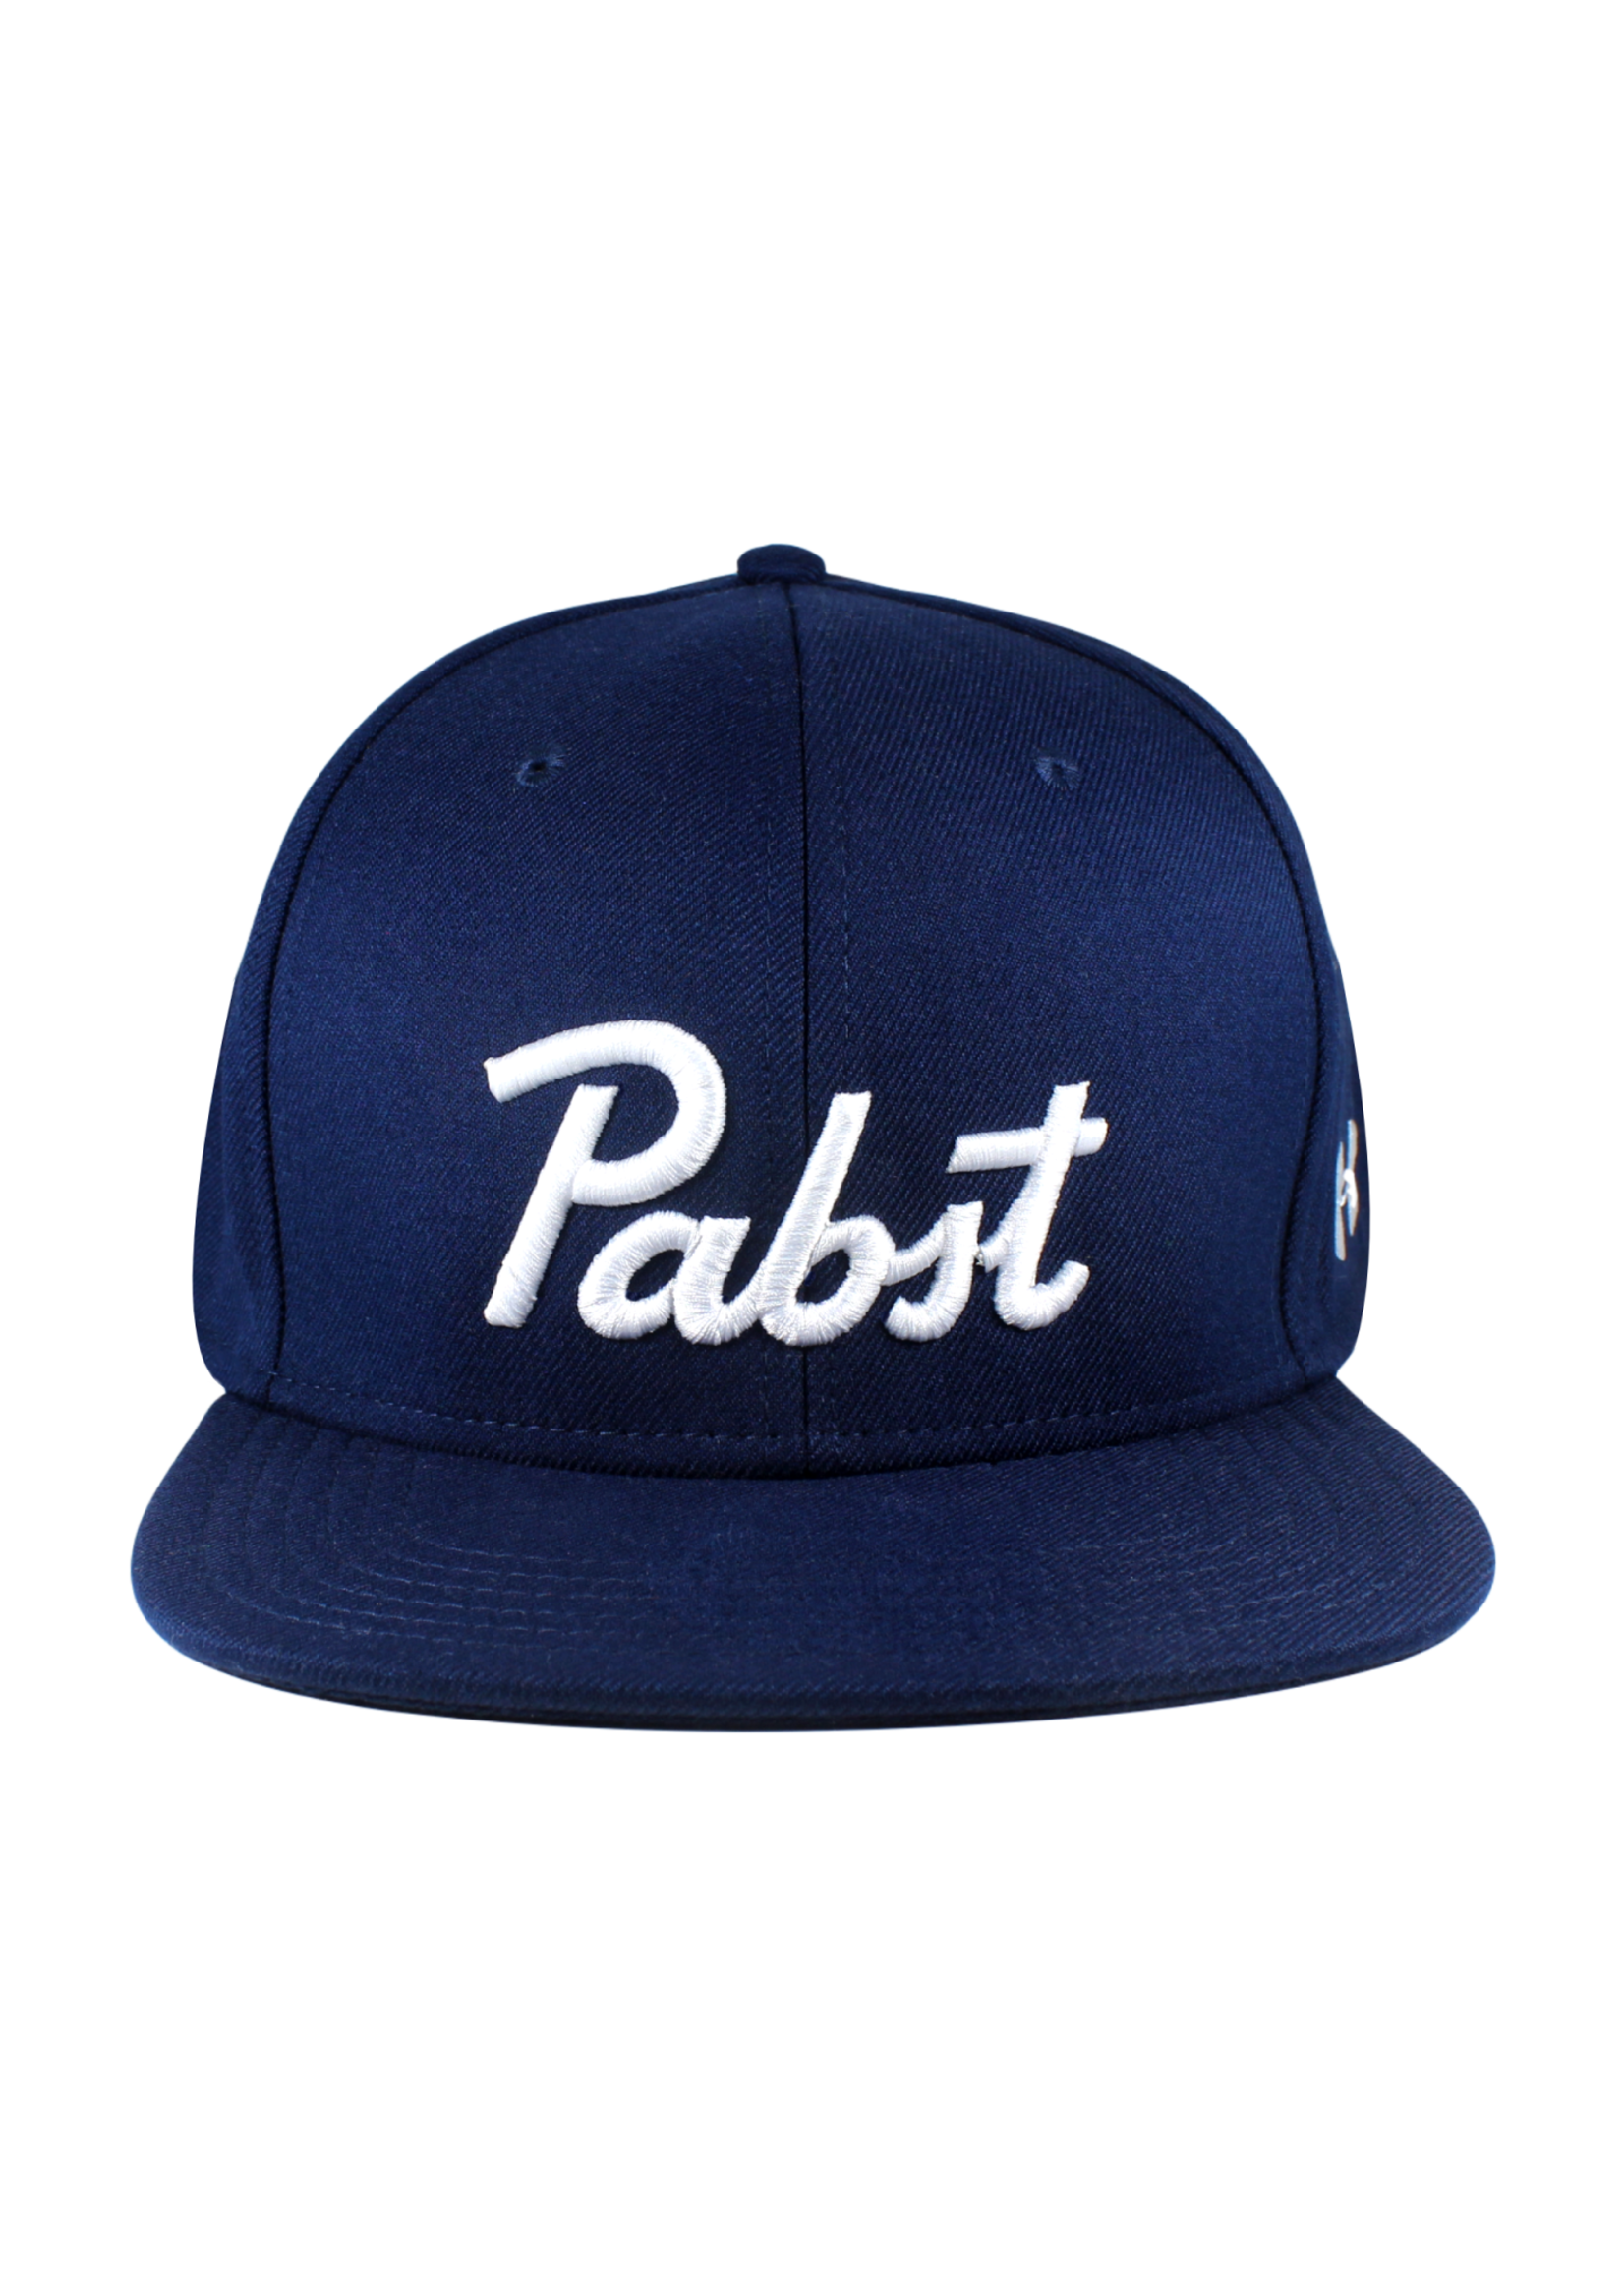 Pabst Pabst Navy Under Armour Cap